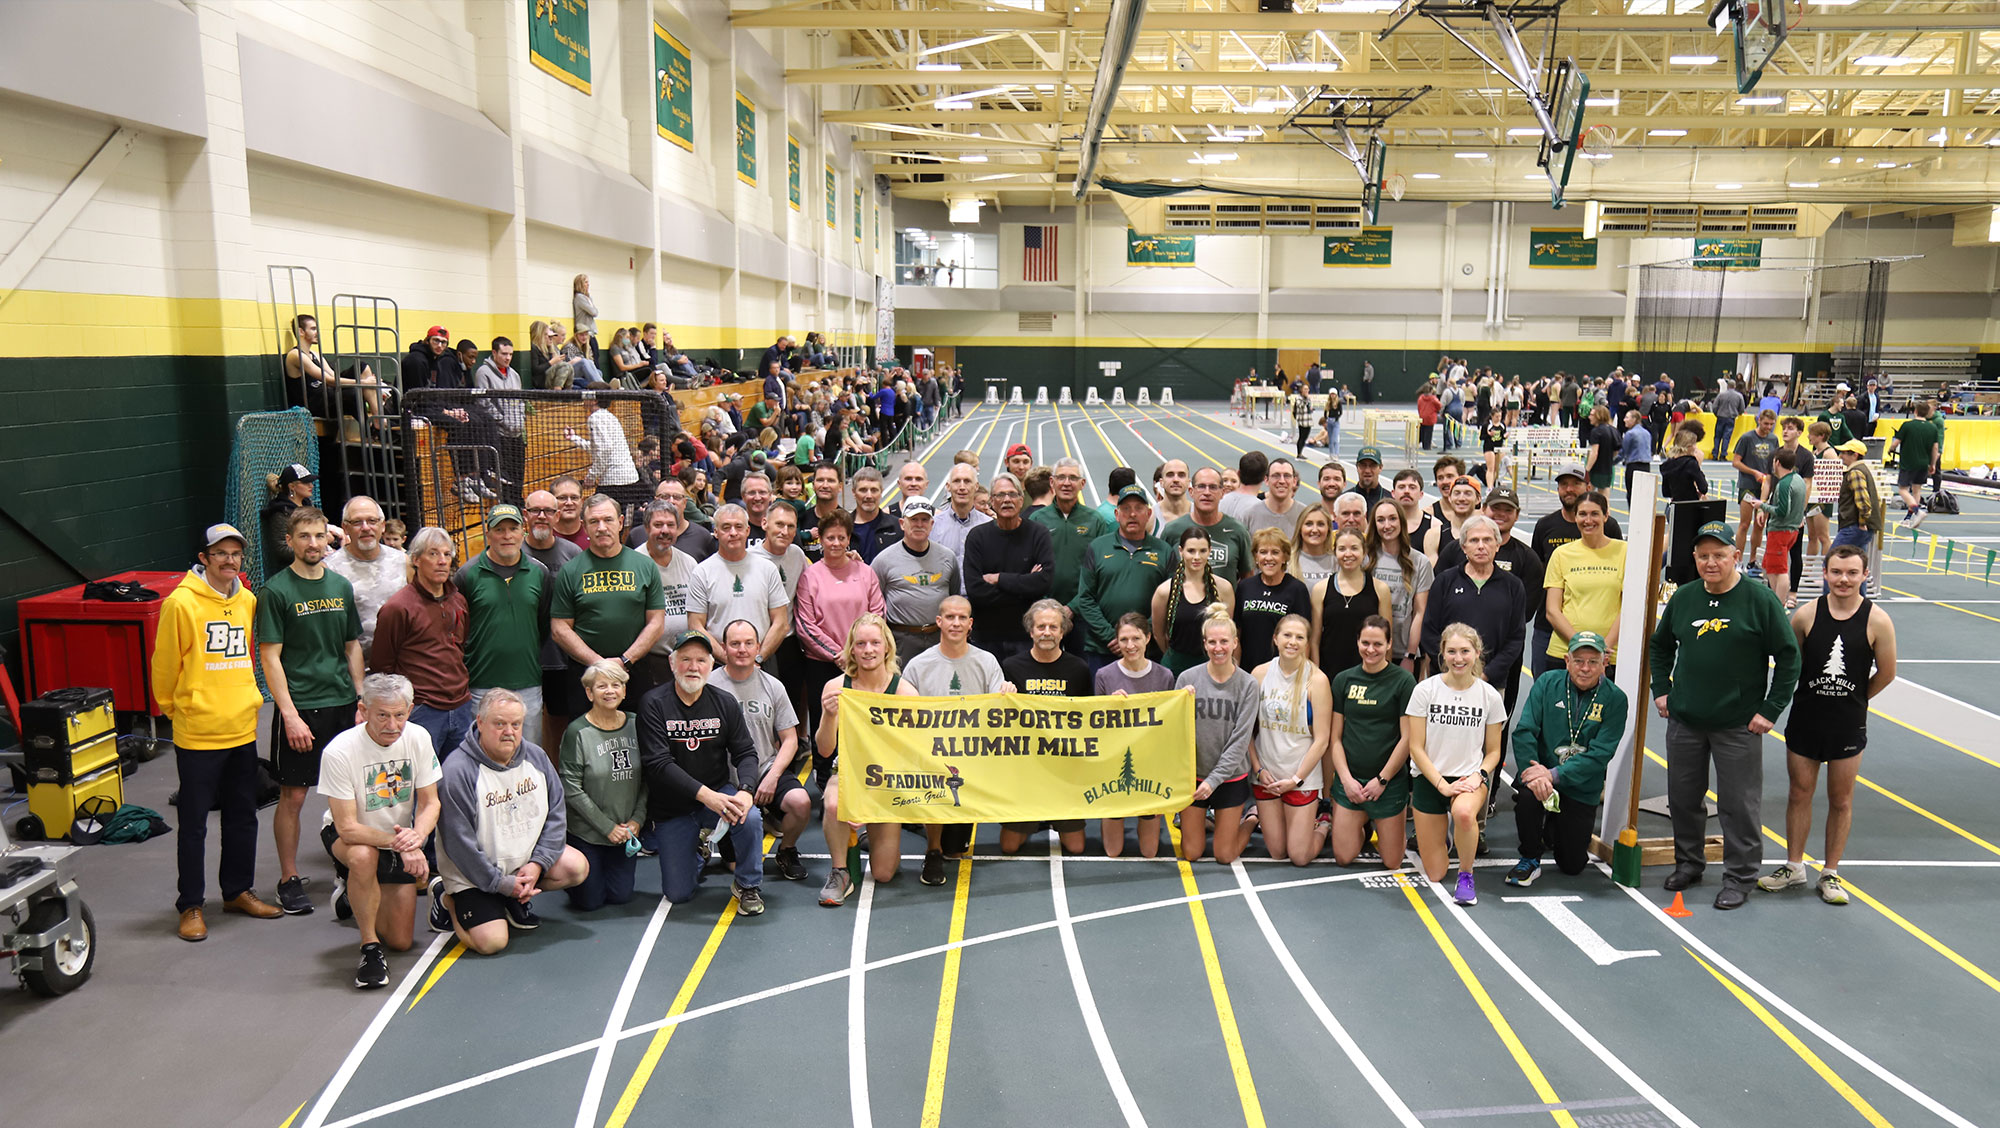 Image of participants in the 2022 Alumni Mile Gathering.